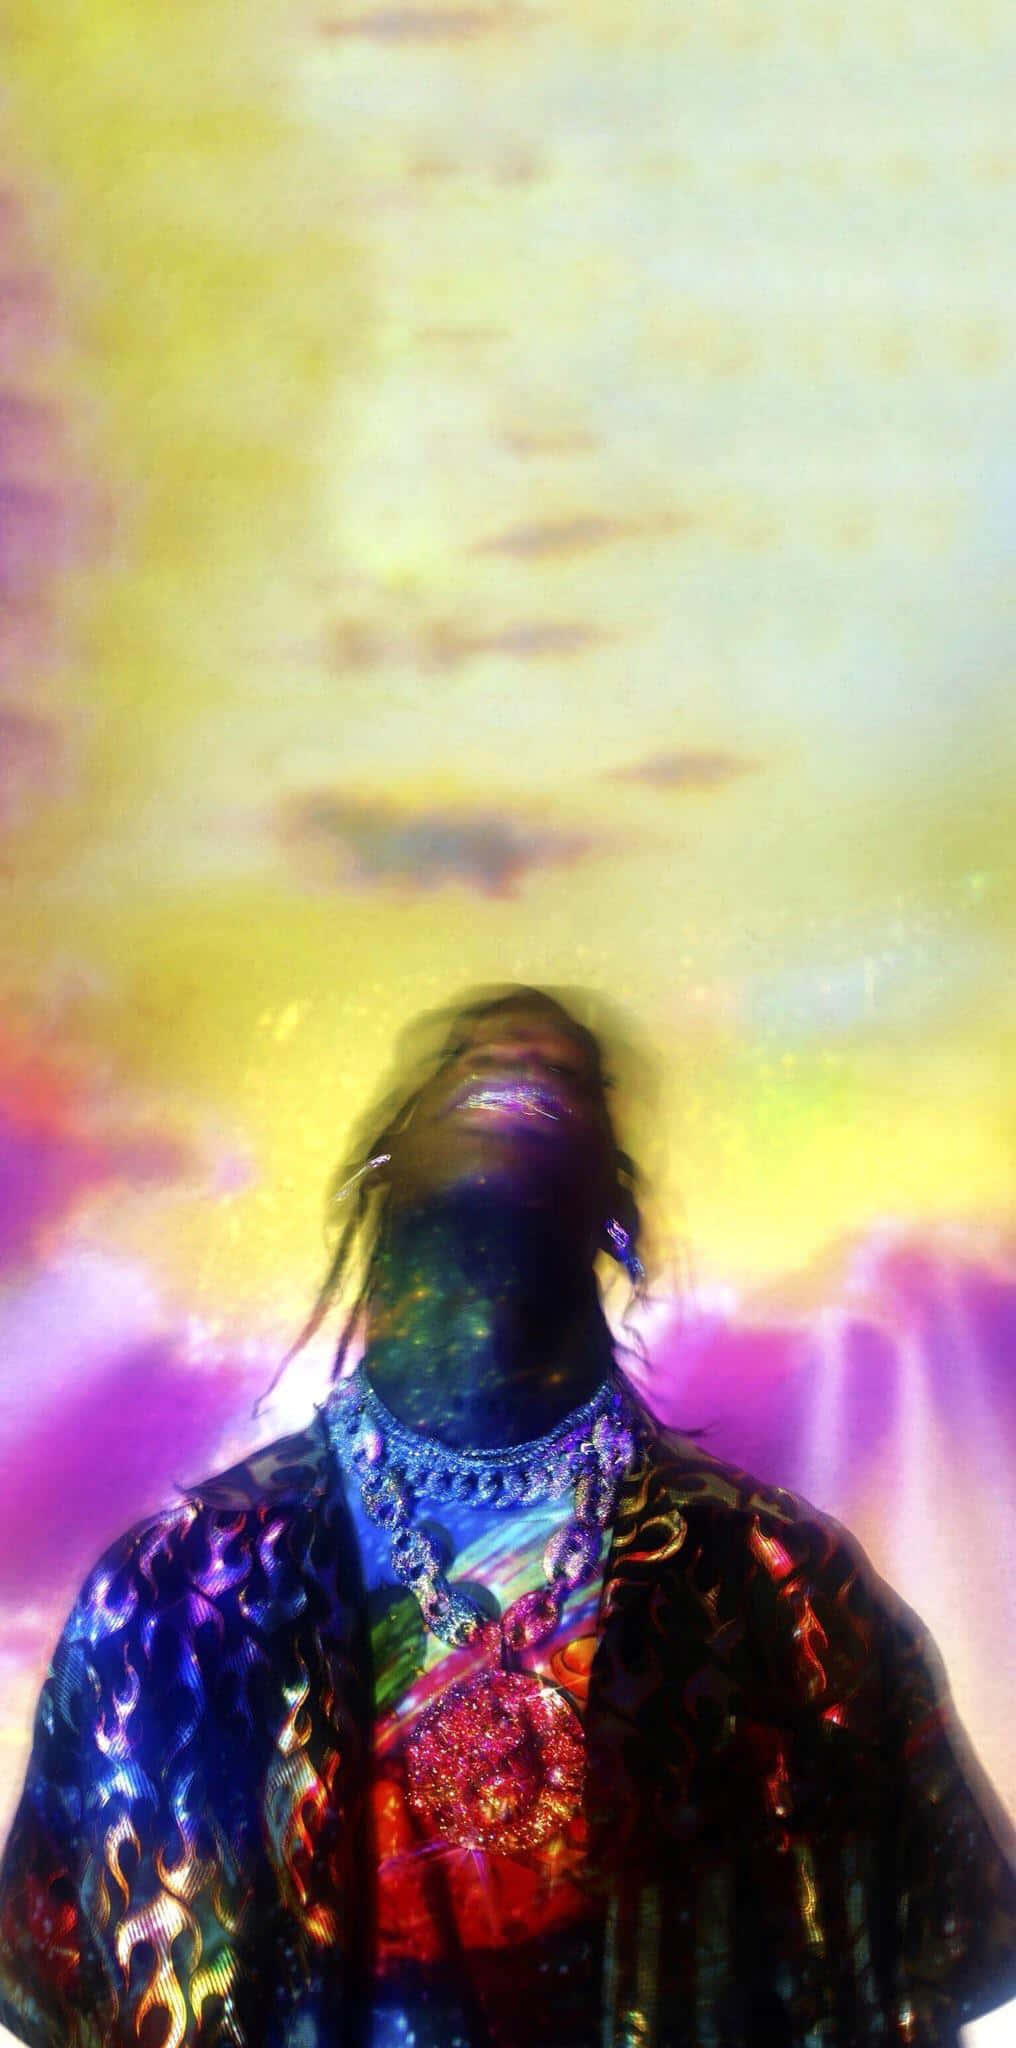 Beautiful Wallpaper Featuring A Stylized Portrait Photograph Of The American Rapper Gunna Wearing A Colorful Outfit On An Equally Colorful Backdrop